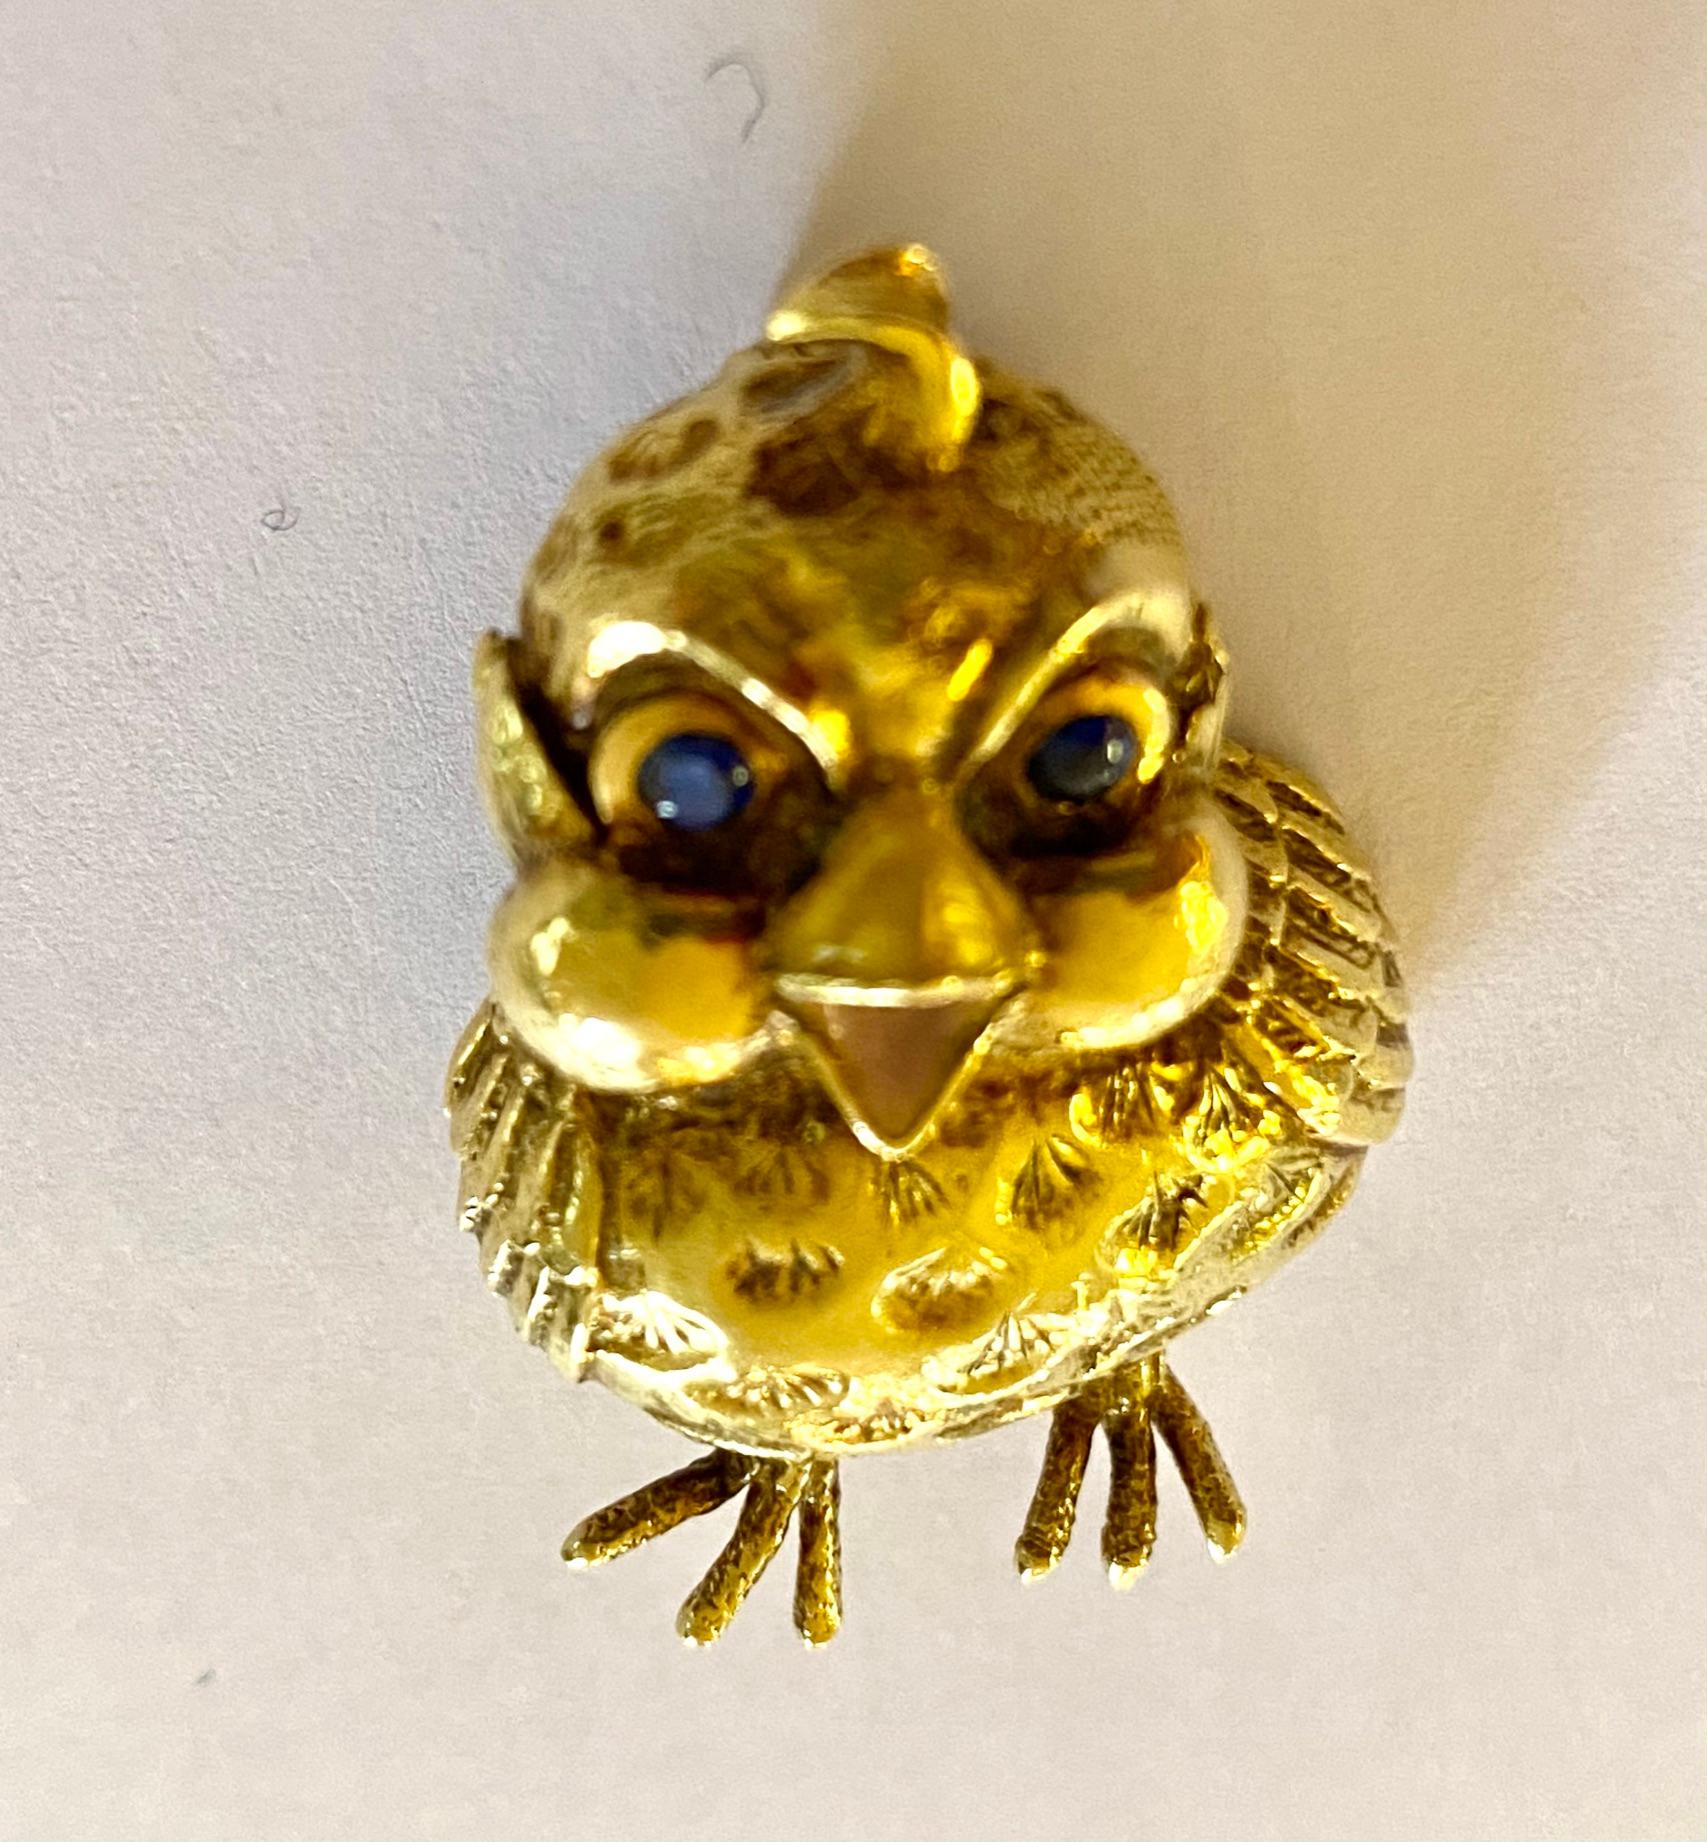 Cabochon 18 Karat Yellow Gold Brooch, 'Chick', London, 1970 For Sale